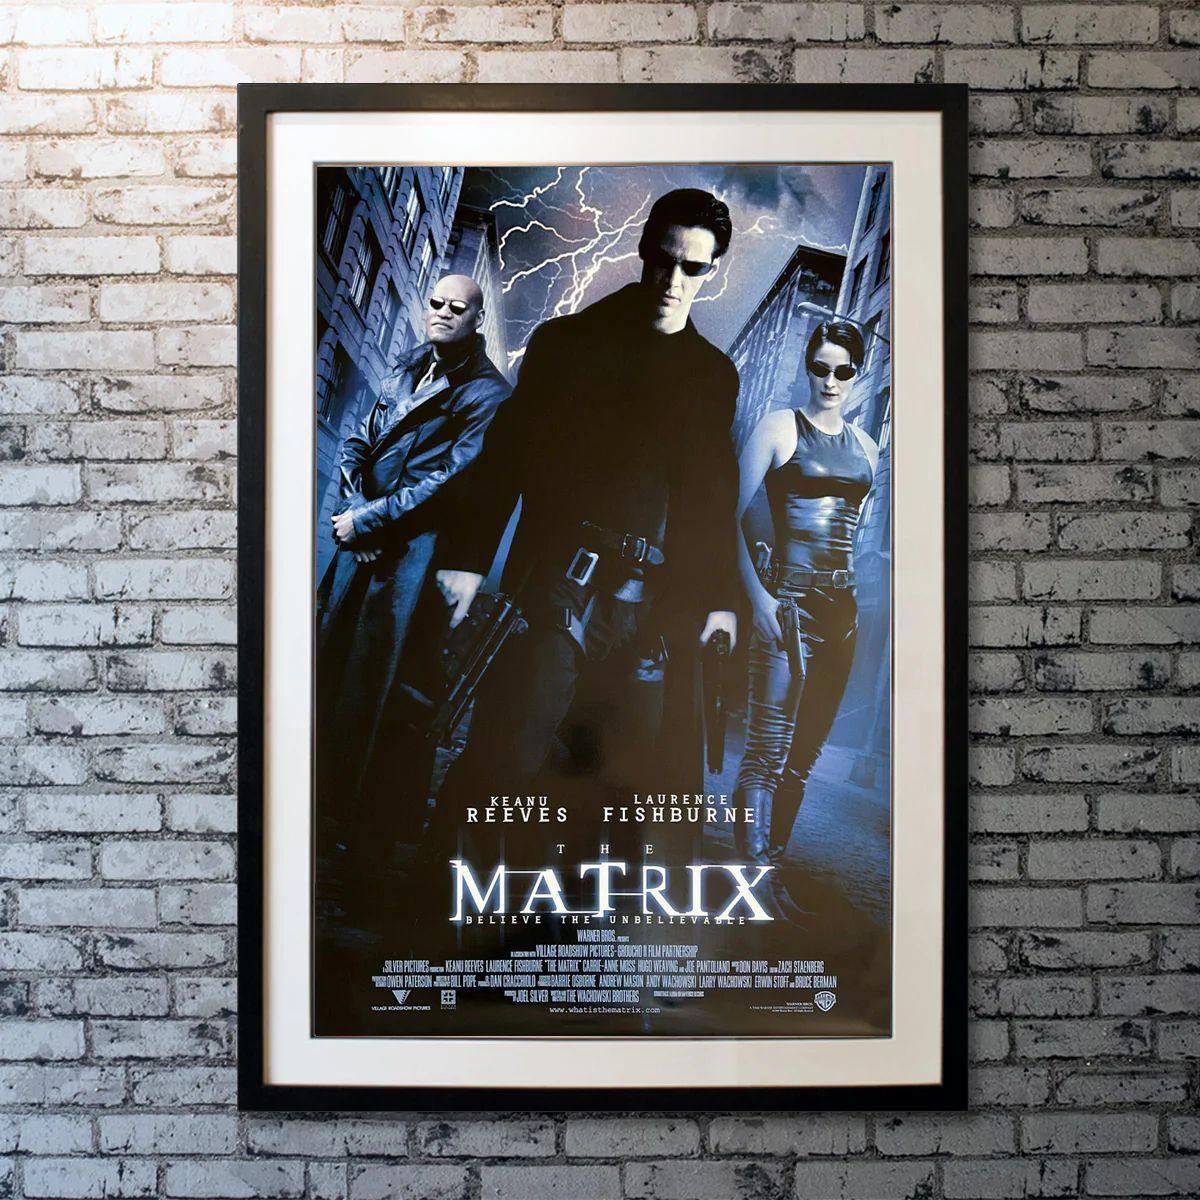 The Matrix, Unframed Poster, 1999

Original One Sheet (27 X 41 Inches). When a beautiful stranger leads computer hacker neo to a forbidding underworld, he discovers the shocking truth the life he knows is the elaborate deception of an evil cyber